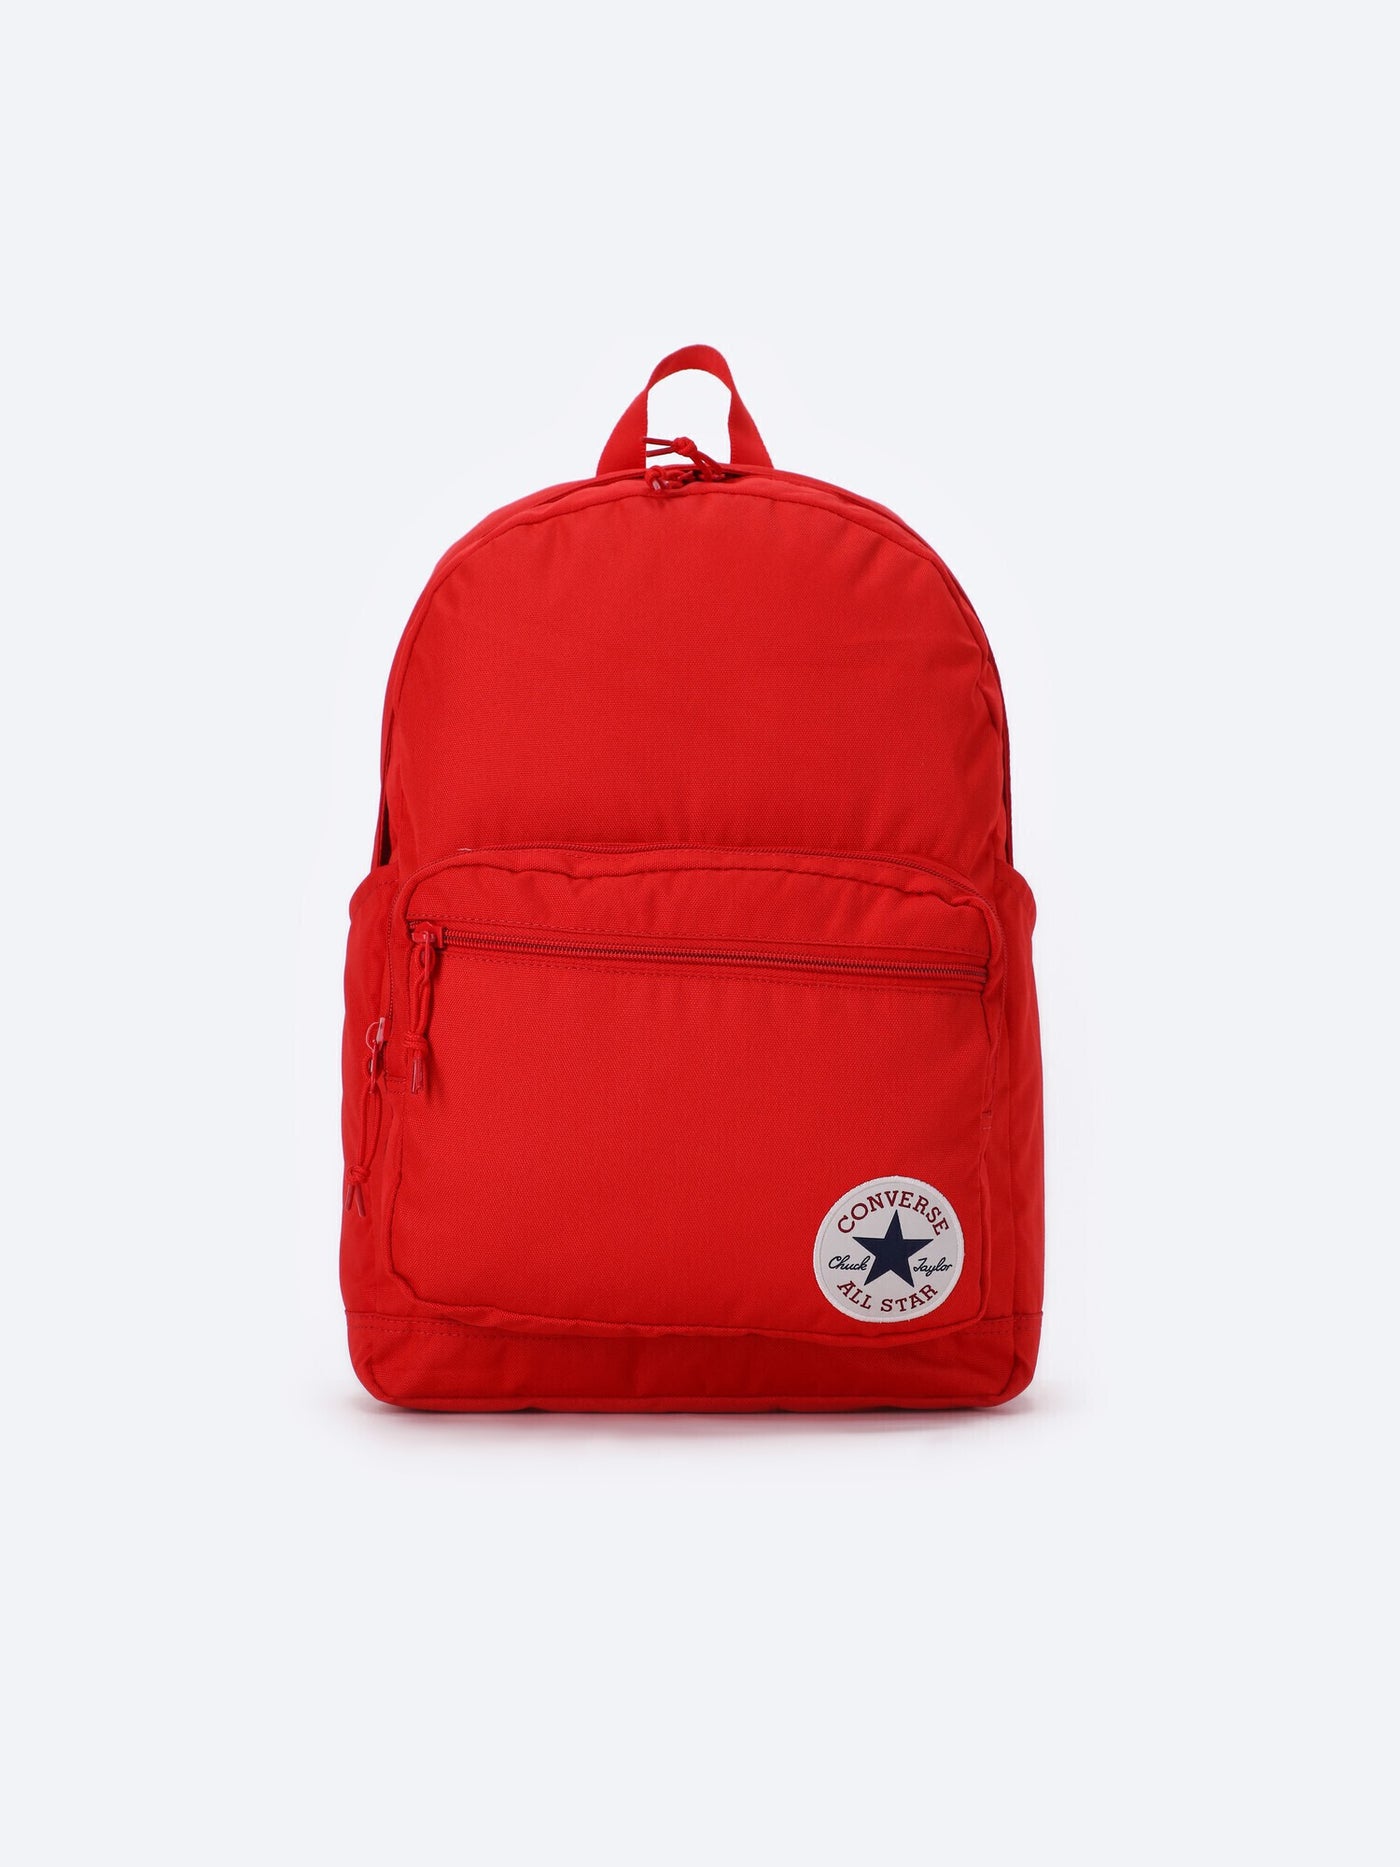 Converse Unisex Go 2 Backpack - 10020533-A03